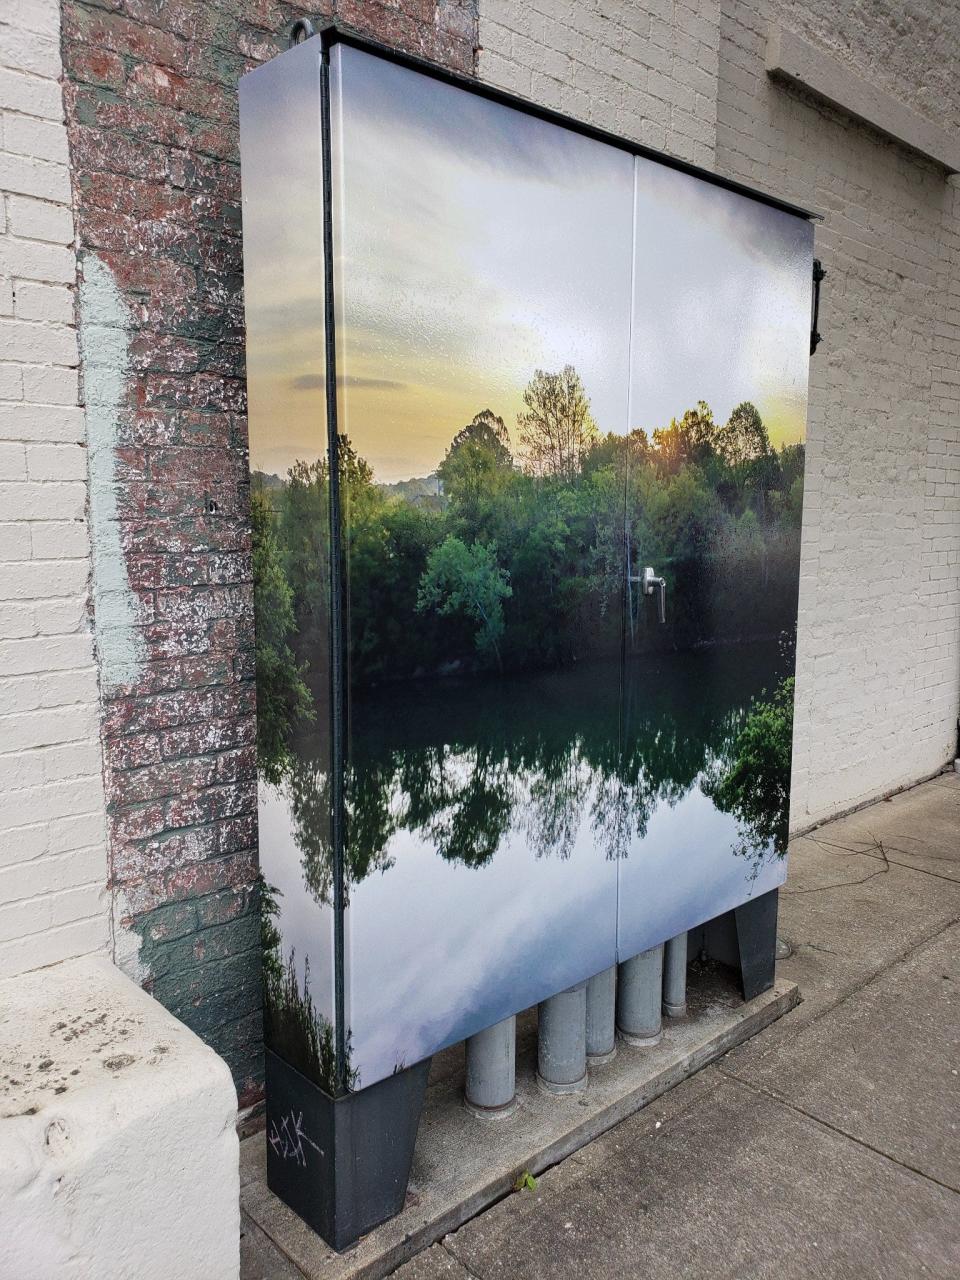 A photo of The Duck River by Ross Jaynes adorns one of several utility boxes as part of a new public art project spearheaded by The Columbia Arts Council.